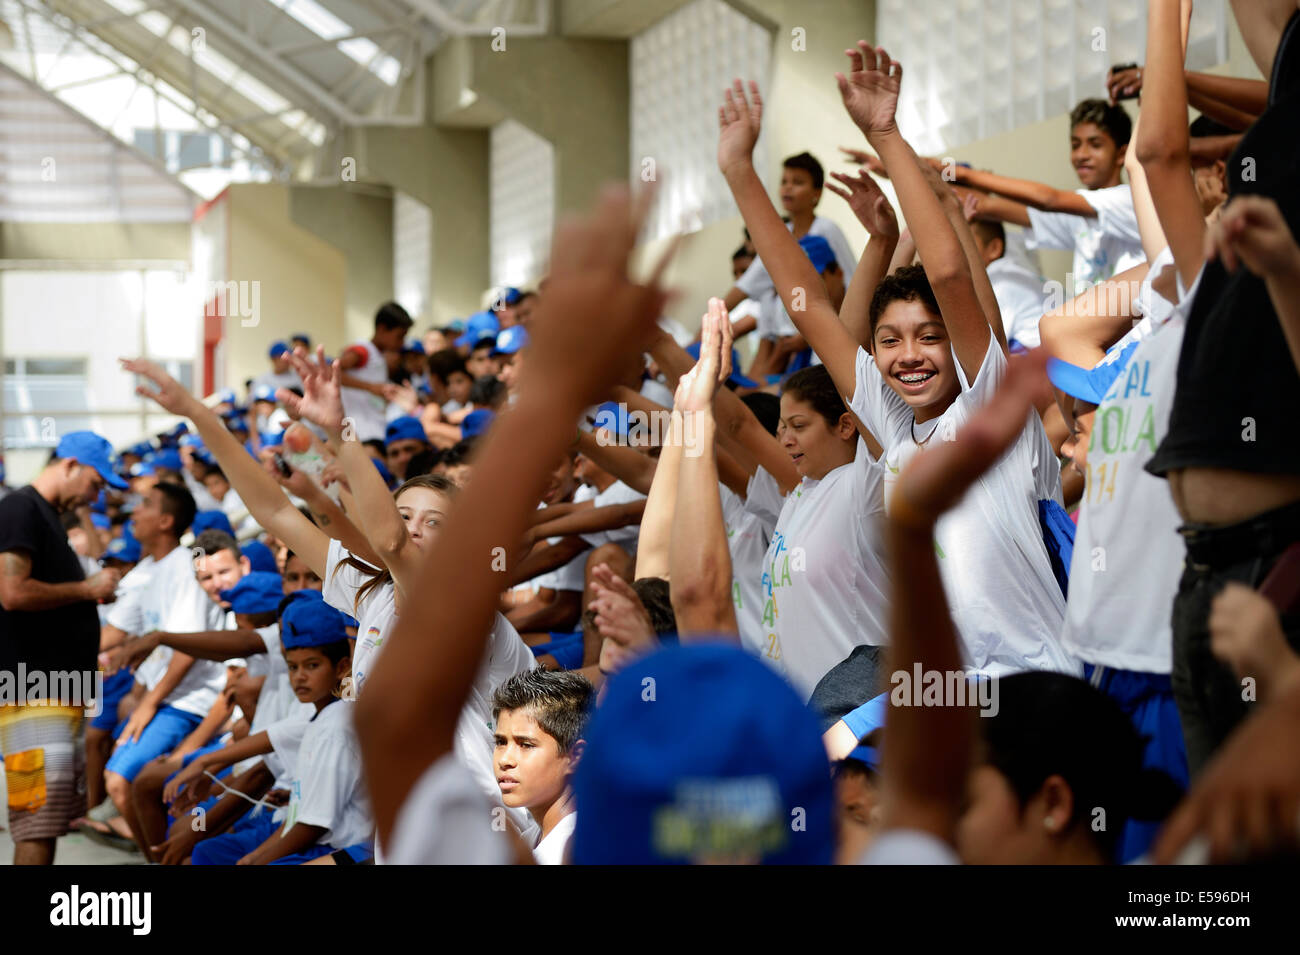 Brazil, Fortaleza, Young people at football tornament Stock Photo